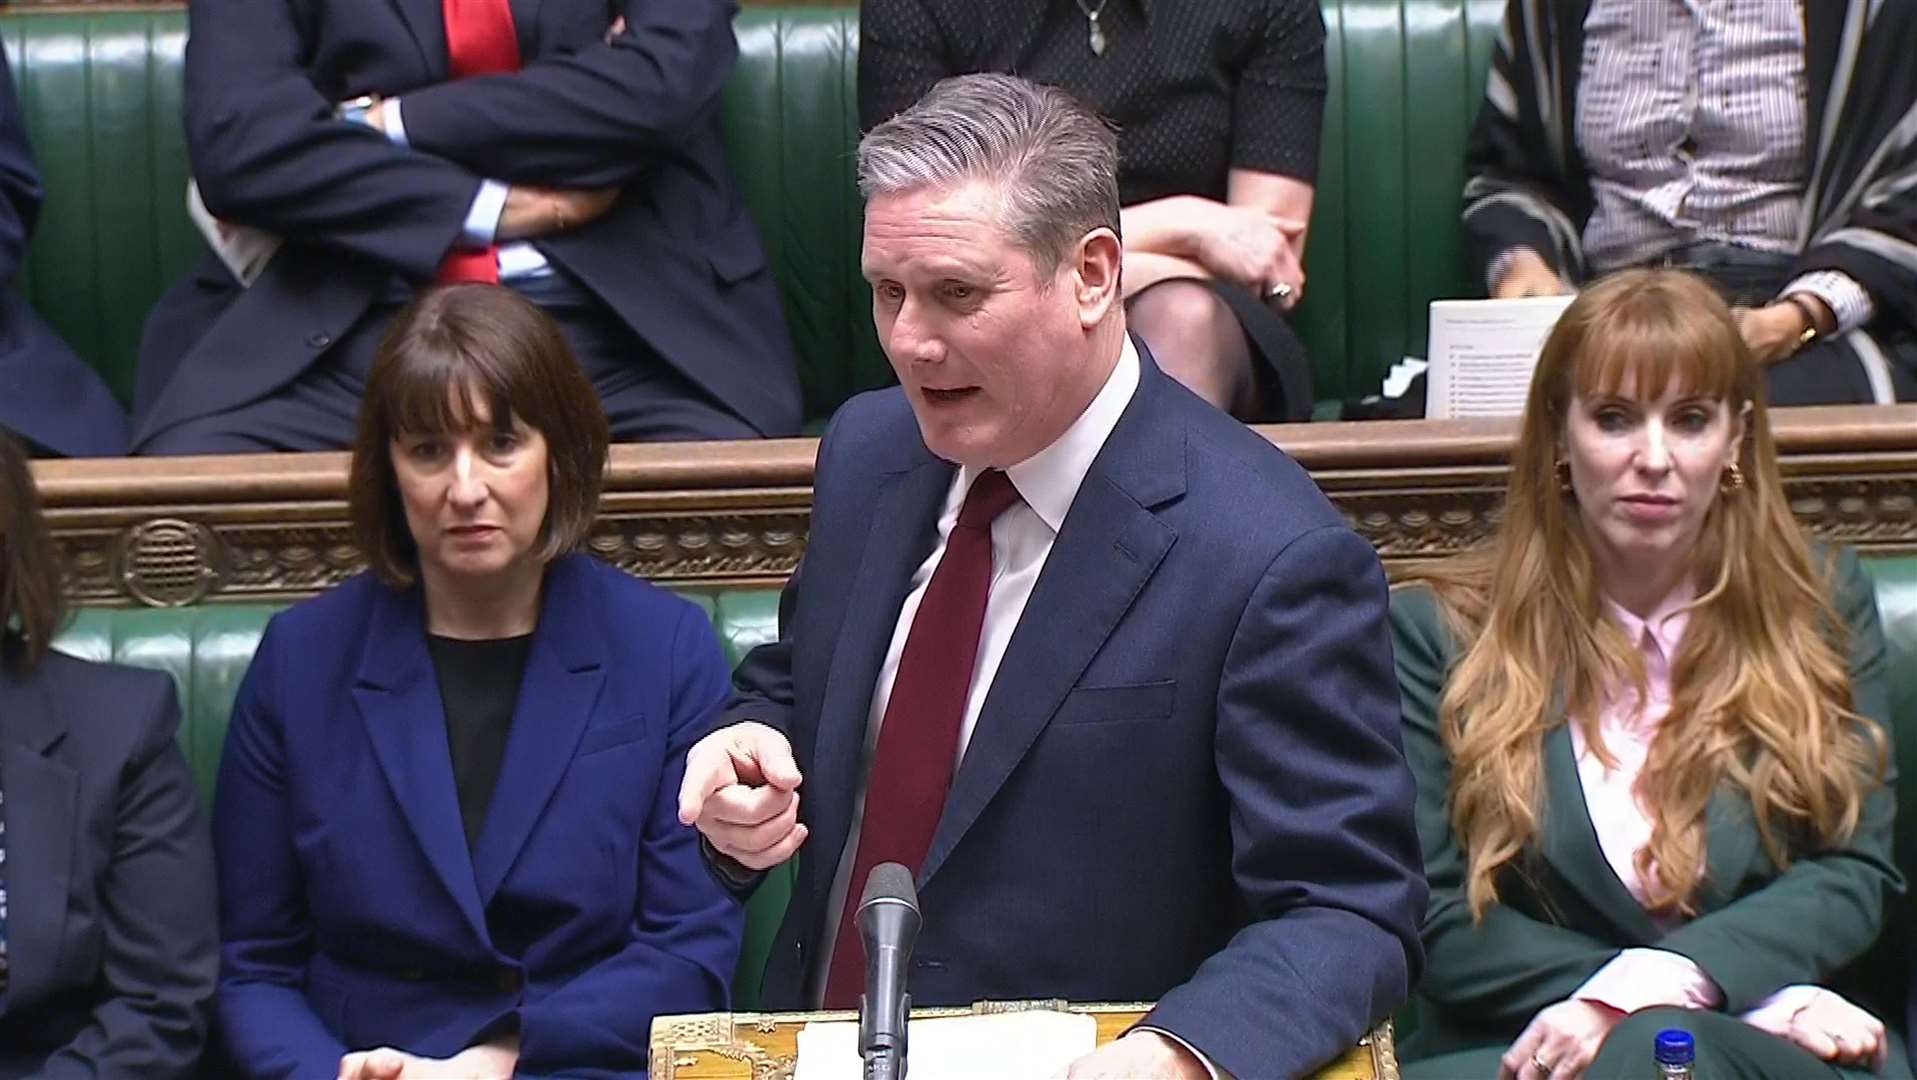 Labour leader Sir Keir Starmer speaks during Prime Minister’s Questions in the House of Commons (House of Commons/UK Parliament/PA)